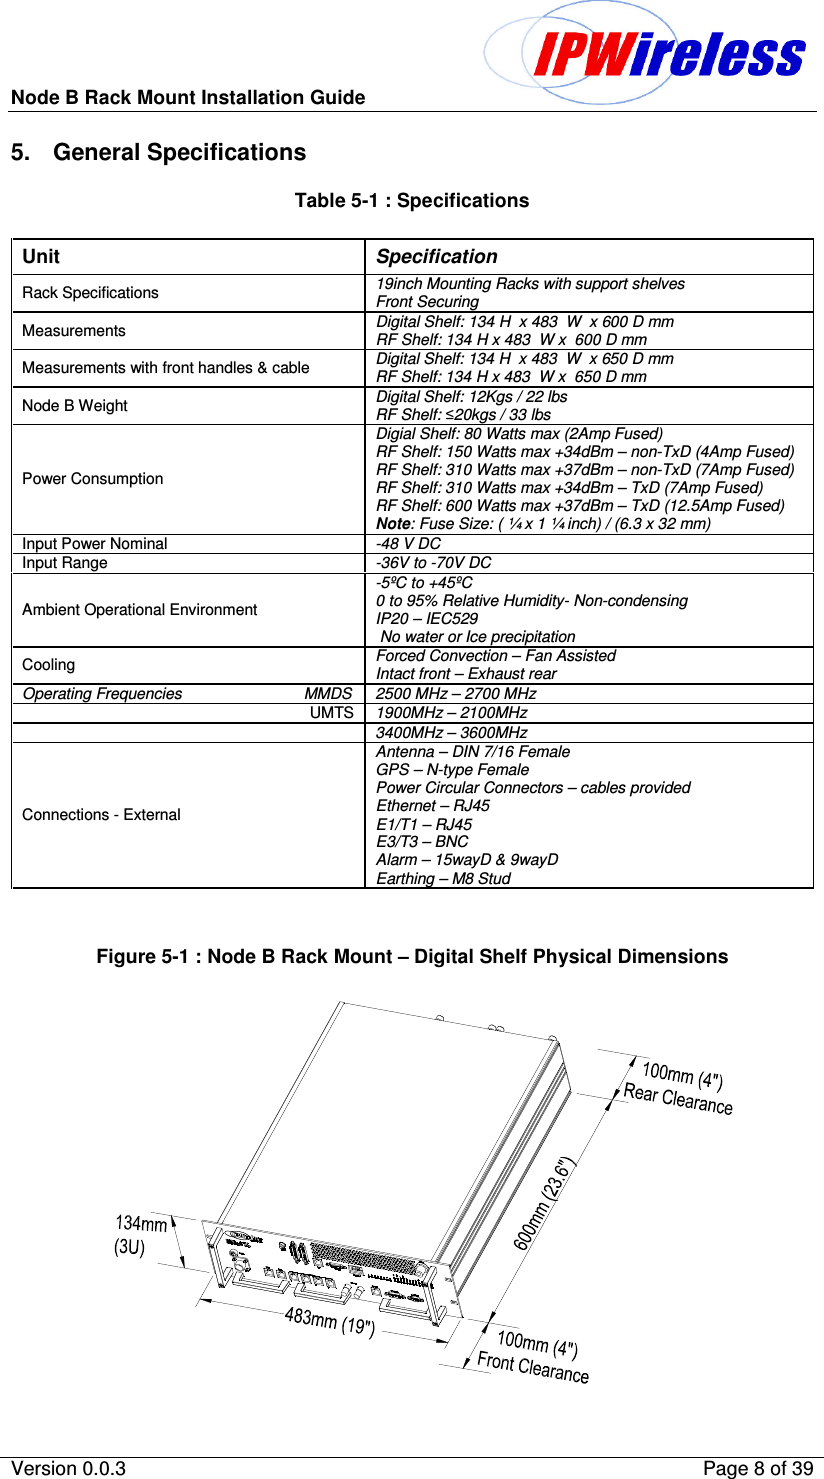 Node B Rack Mount Installation Guide                          Version 0.0.3    Page 8 of 39  5.  General Specifications Table 5-1 : Specifications   Figure 5-1 : Node B Rack Mount – Digital Shelf Physical Dimensions               Unit   Specification Rack Specifications  19inch Mounting Racks with support shelves Front Securing  Measurements  Digital Shelf: 134 H  x 483  W  x 600 D mm RF Shelf: 134 H x 483  W x  600 D mm Measurements with front handles &amp; cable  Digital Shelf: 134 H  x 483  W  x 650 D mm RF Shelf: 134 H x 483  W x  650 D mm Node B Weight   Digital Shelf: 12Kgs / 22 lbs RF Shelf: 20kgs / 33 lbs Power Consumption Digial Shelf: 80 Watts max (2Amp Fused) RF Shelf: 150 Watts max +34dBm – non-TxD (4Amp Fused) RF Shelf: 310 Watts max +37dBm – non-TxD (7Amp Fused) RF Shelf: 310 Watts max +34dBm – TxD (7Amp Fused) RF Shelf: 600 Watts max +37dBm – TxD (12.5Amp Fused) Note: Fuse Size: ( ¼ x 1 ¼ inch) / (6.3 x 32 mm) Input Power Nominal  -48 V DC Input Range  -36V to -70V DC Ambient Operational Environment  -5ºC to +45ºC 0 to 95% Relative Humidity- Non-condensing IP20 – IEC529   No water or Ice precipitation Cooling  Forced Convection – Fan Assisted Intact front – Exhaust rear Operating Frequencies                            MMDS  2500 MHz – 2700 MHz UMTS  1900MHz – 2100MHz  3400MHz – 3600MHz Connections - External Antenna – DIN 7/16 Female GPS – N-type Female Power Circular Connectors – cables provided Ethernet – RJ45 E1/T1 – RJ45 E3/T3 – BNC Alarm – 15wayD &amp; 9wayD Earthing – M8 Stud  